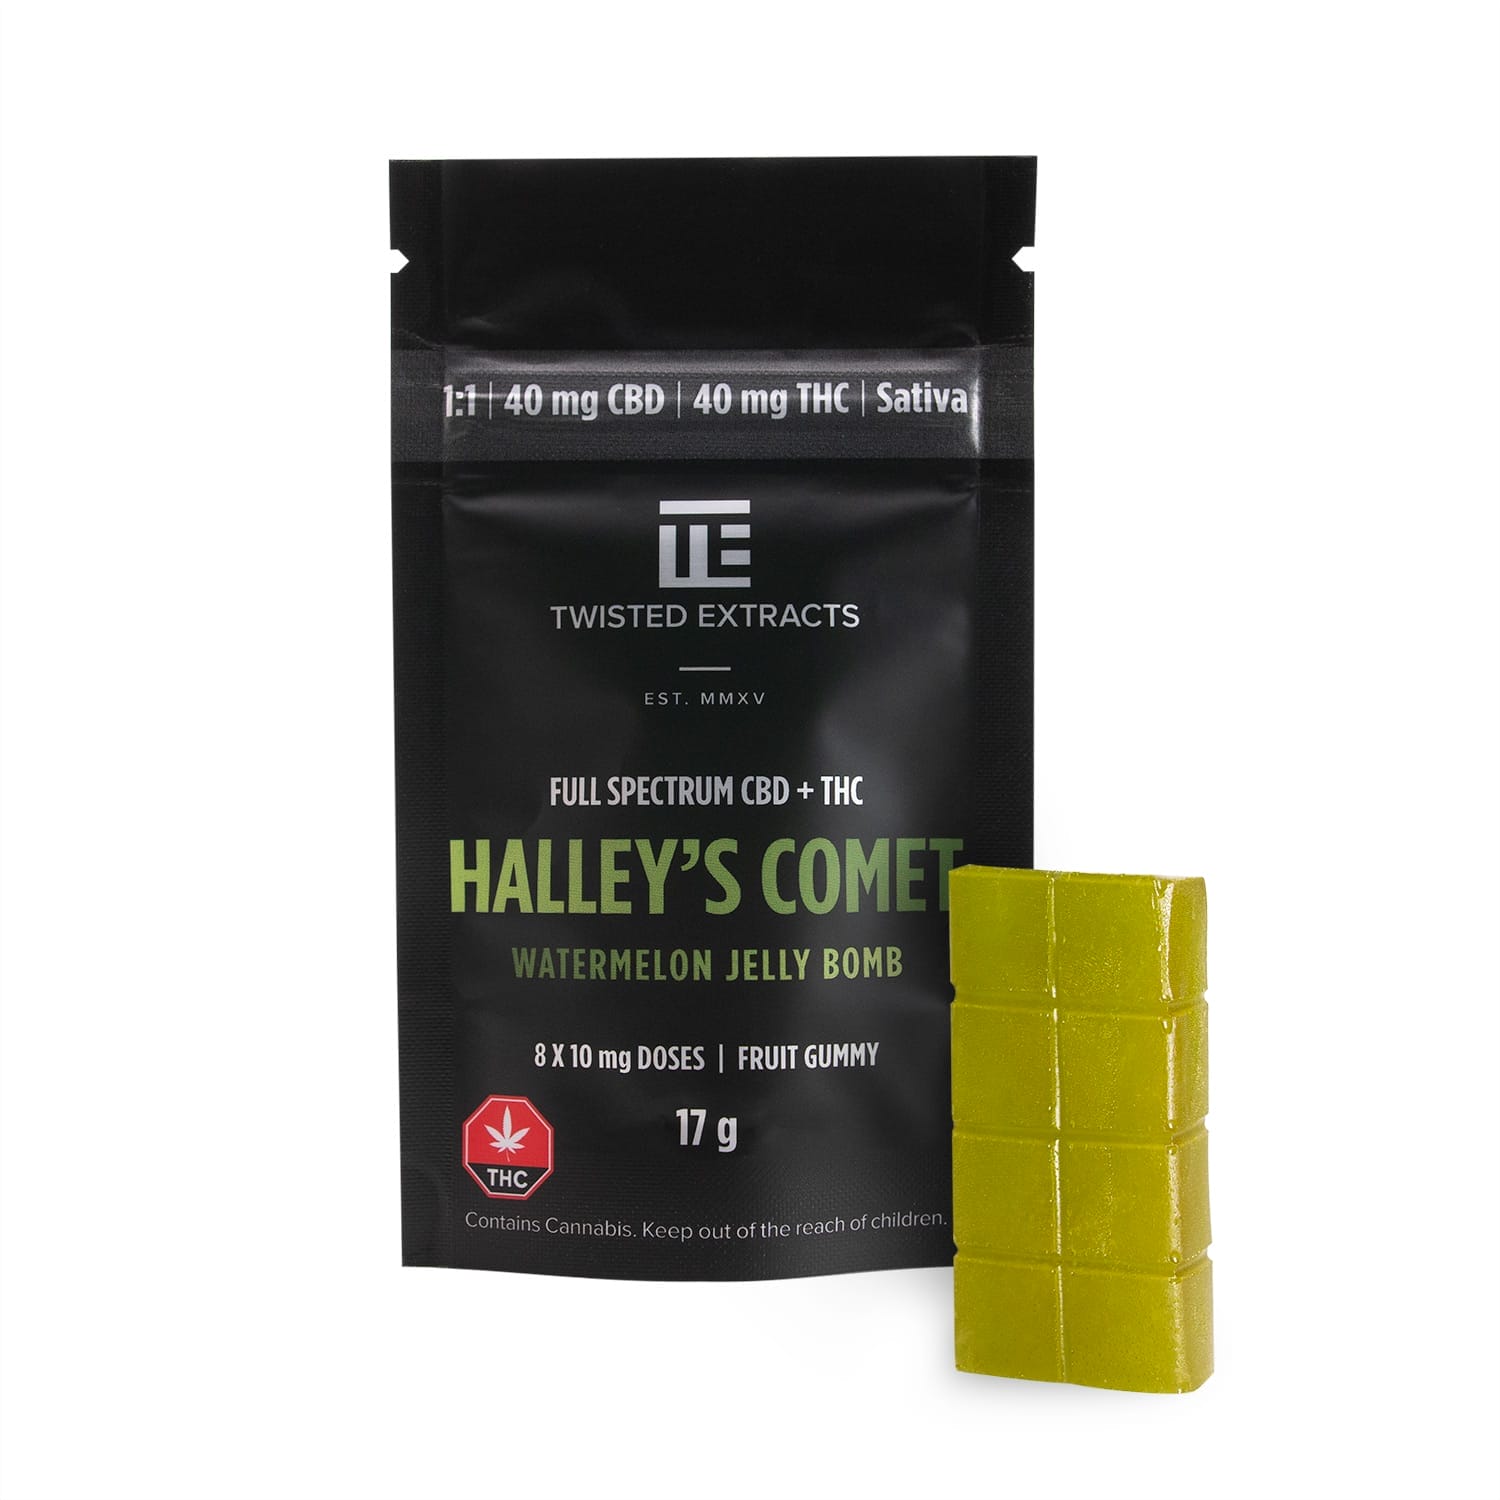 Twisted Extracts - Halley's Comet - Watermelon Jelly Bomb